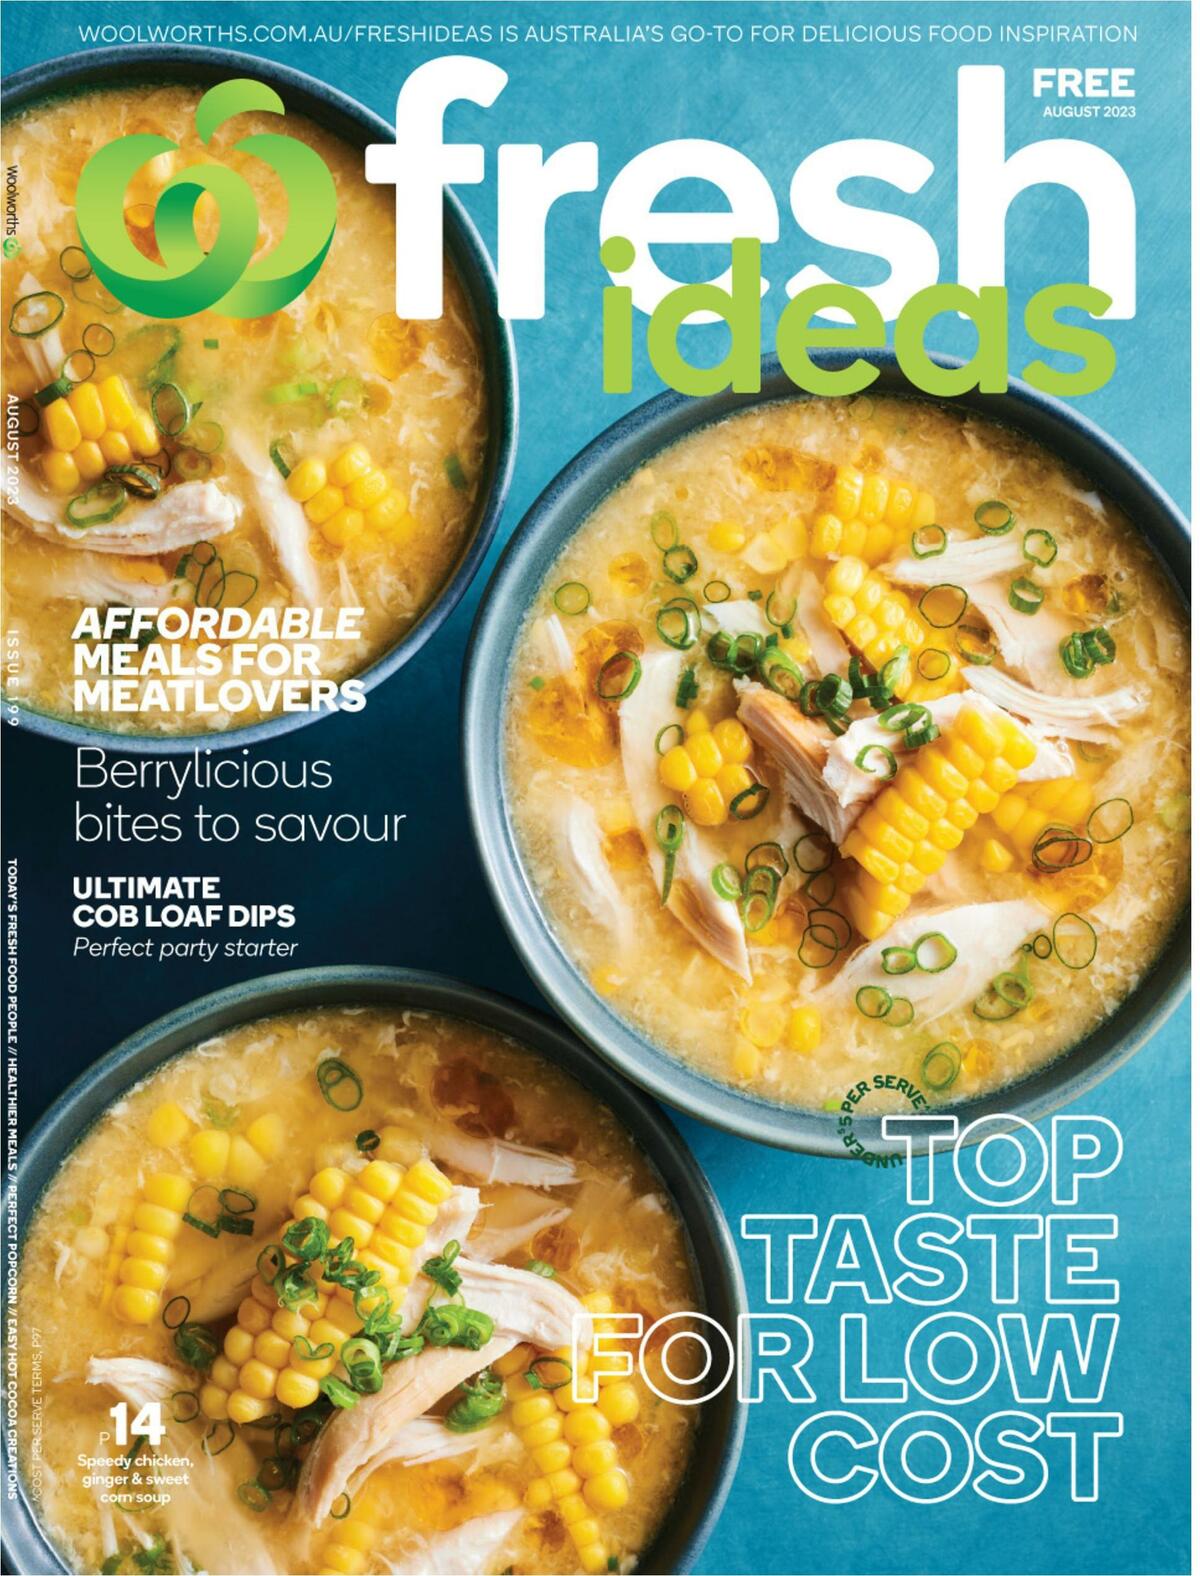 Woolworths Fresh Ideas Magazine August Catalogues from 1 August